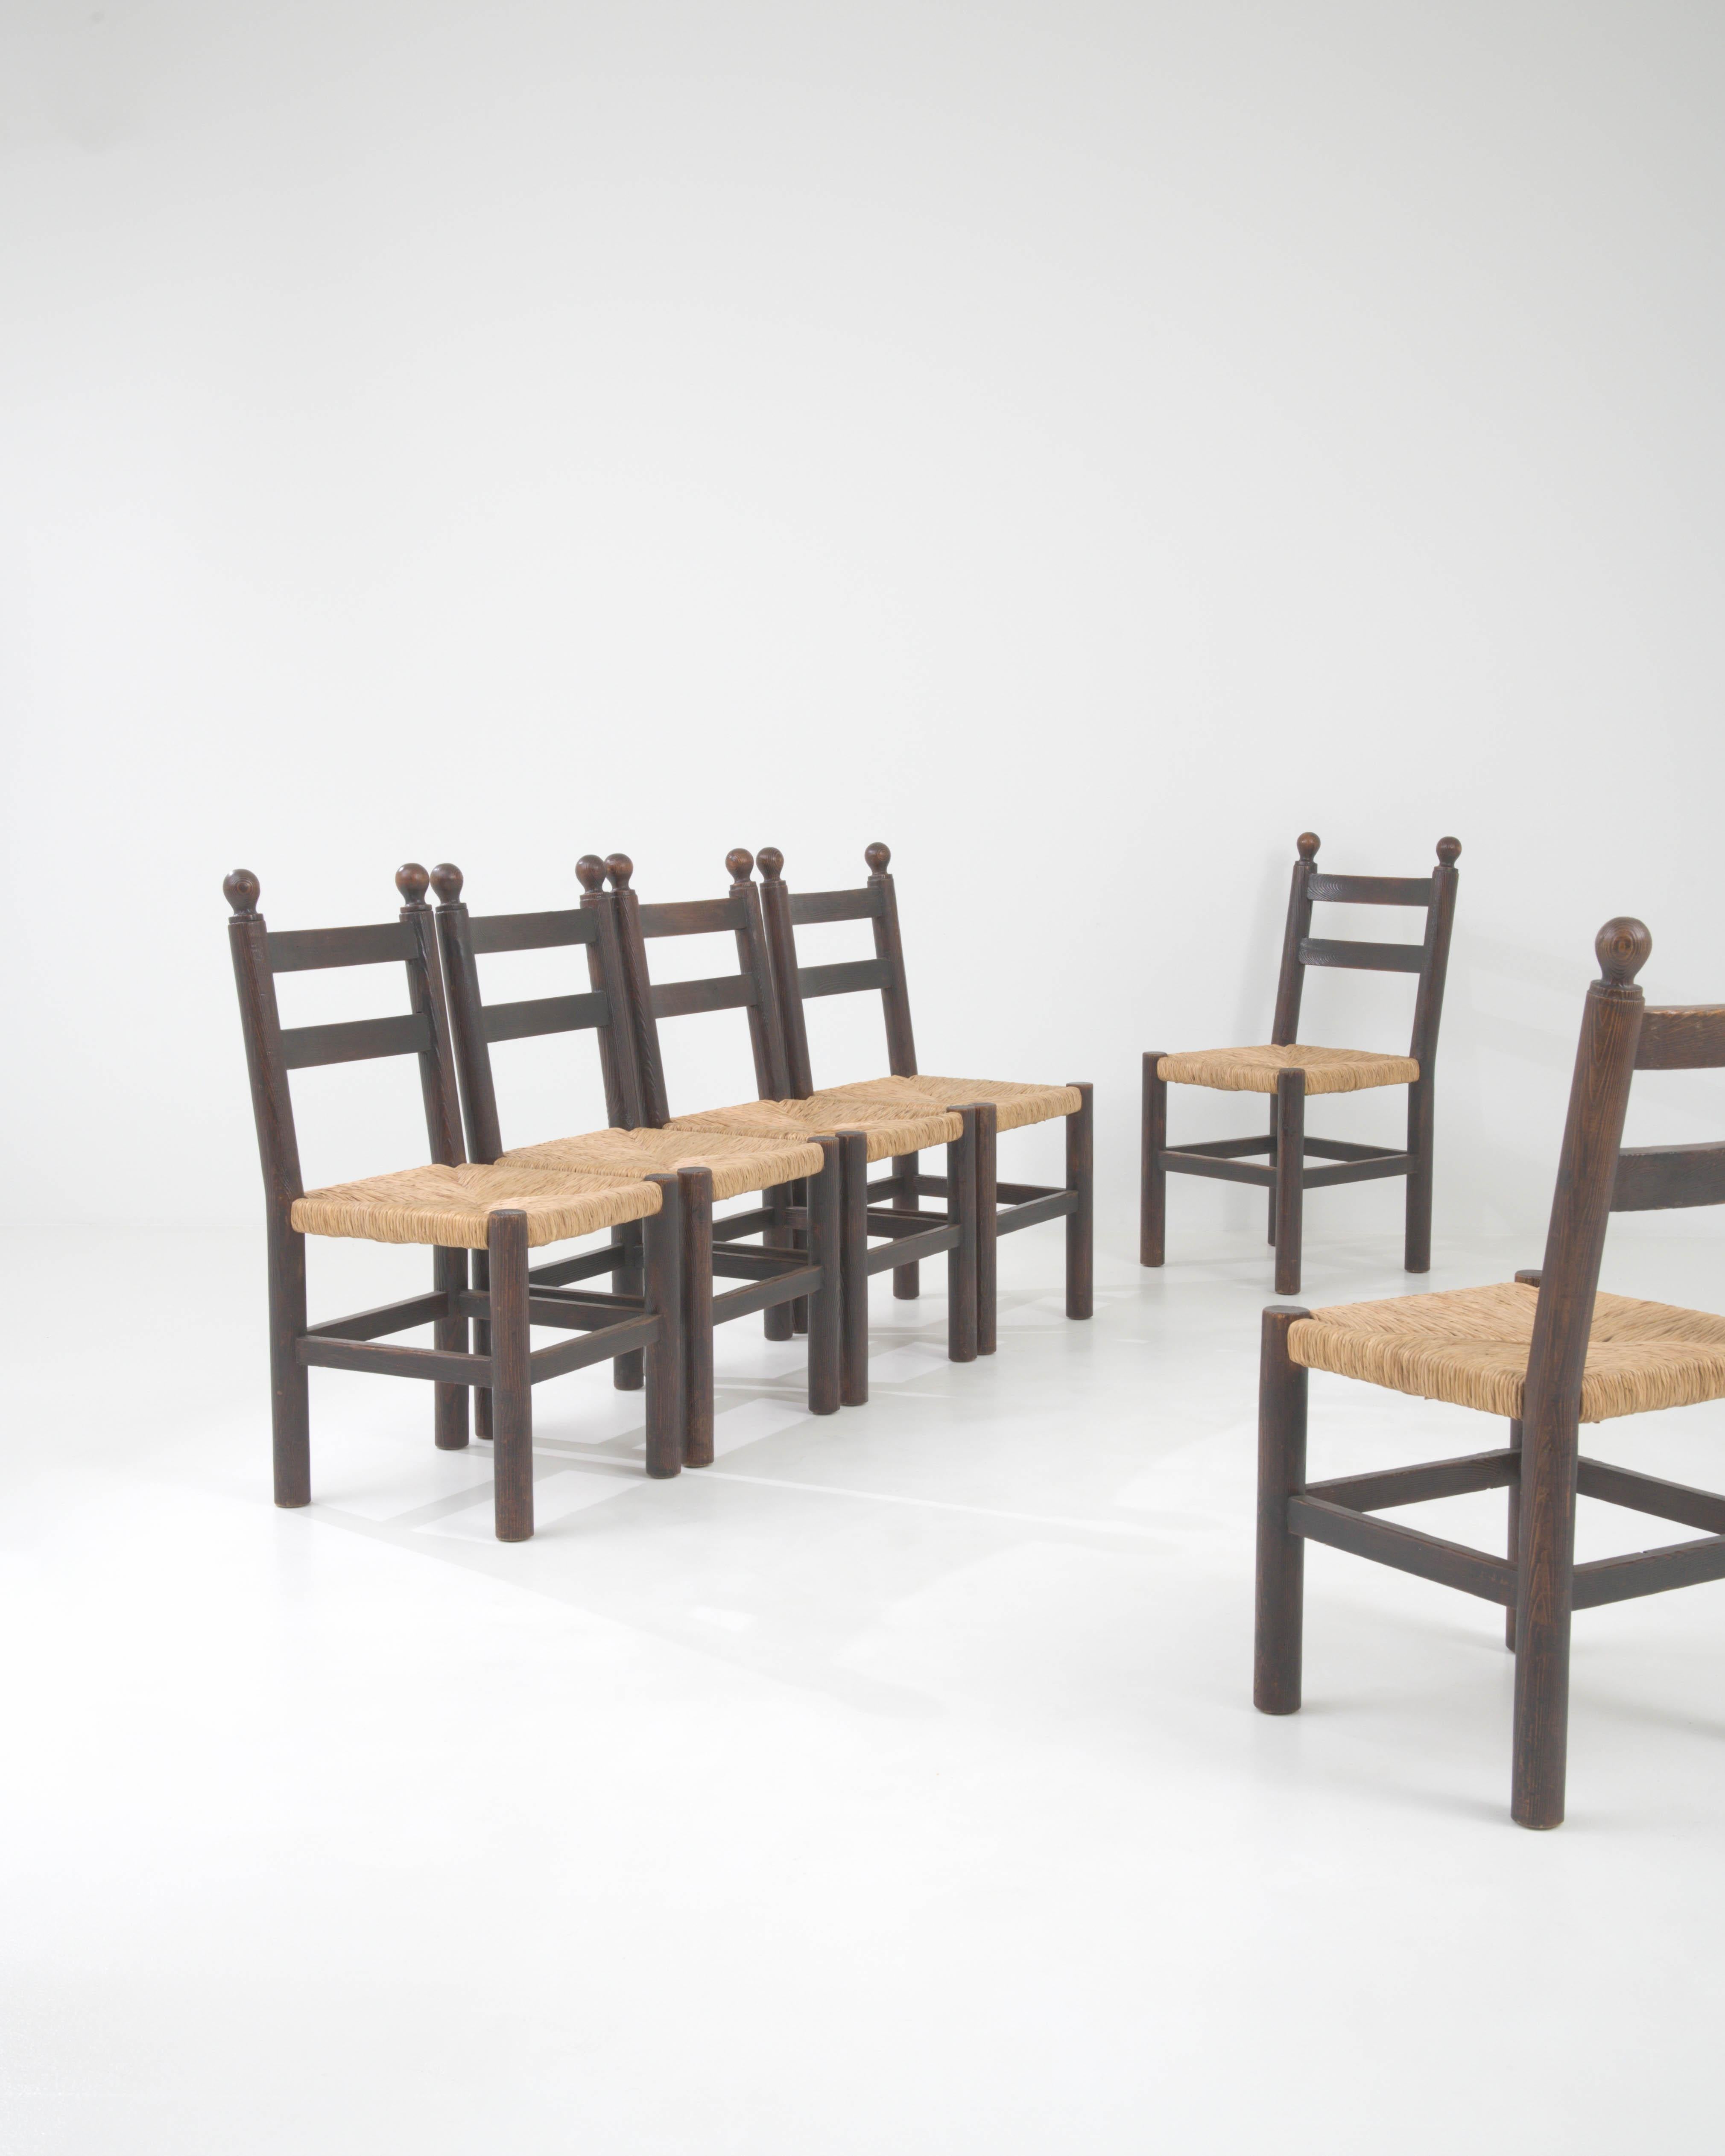 20th Century French Wooden Dining Chairs With Wicker Seats, Set of 6 In Good Condition For Sale In High Point, NC